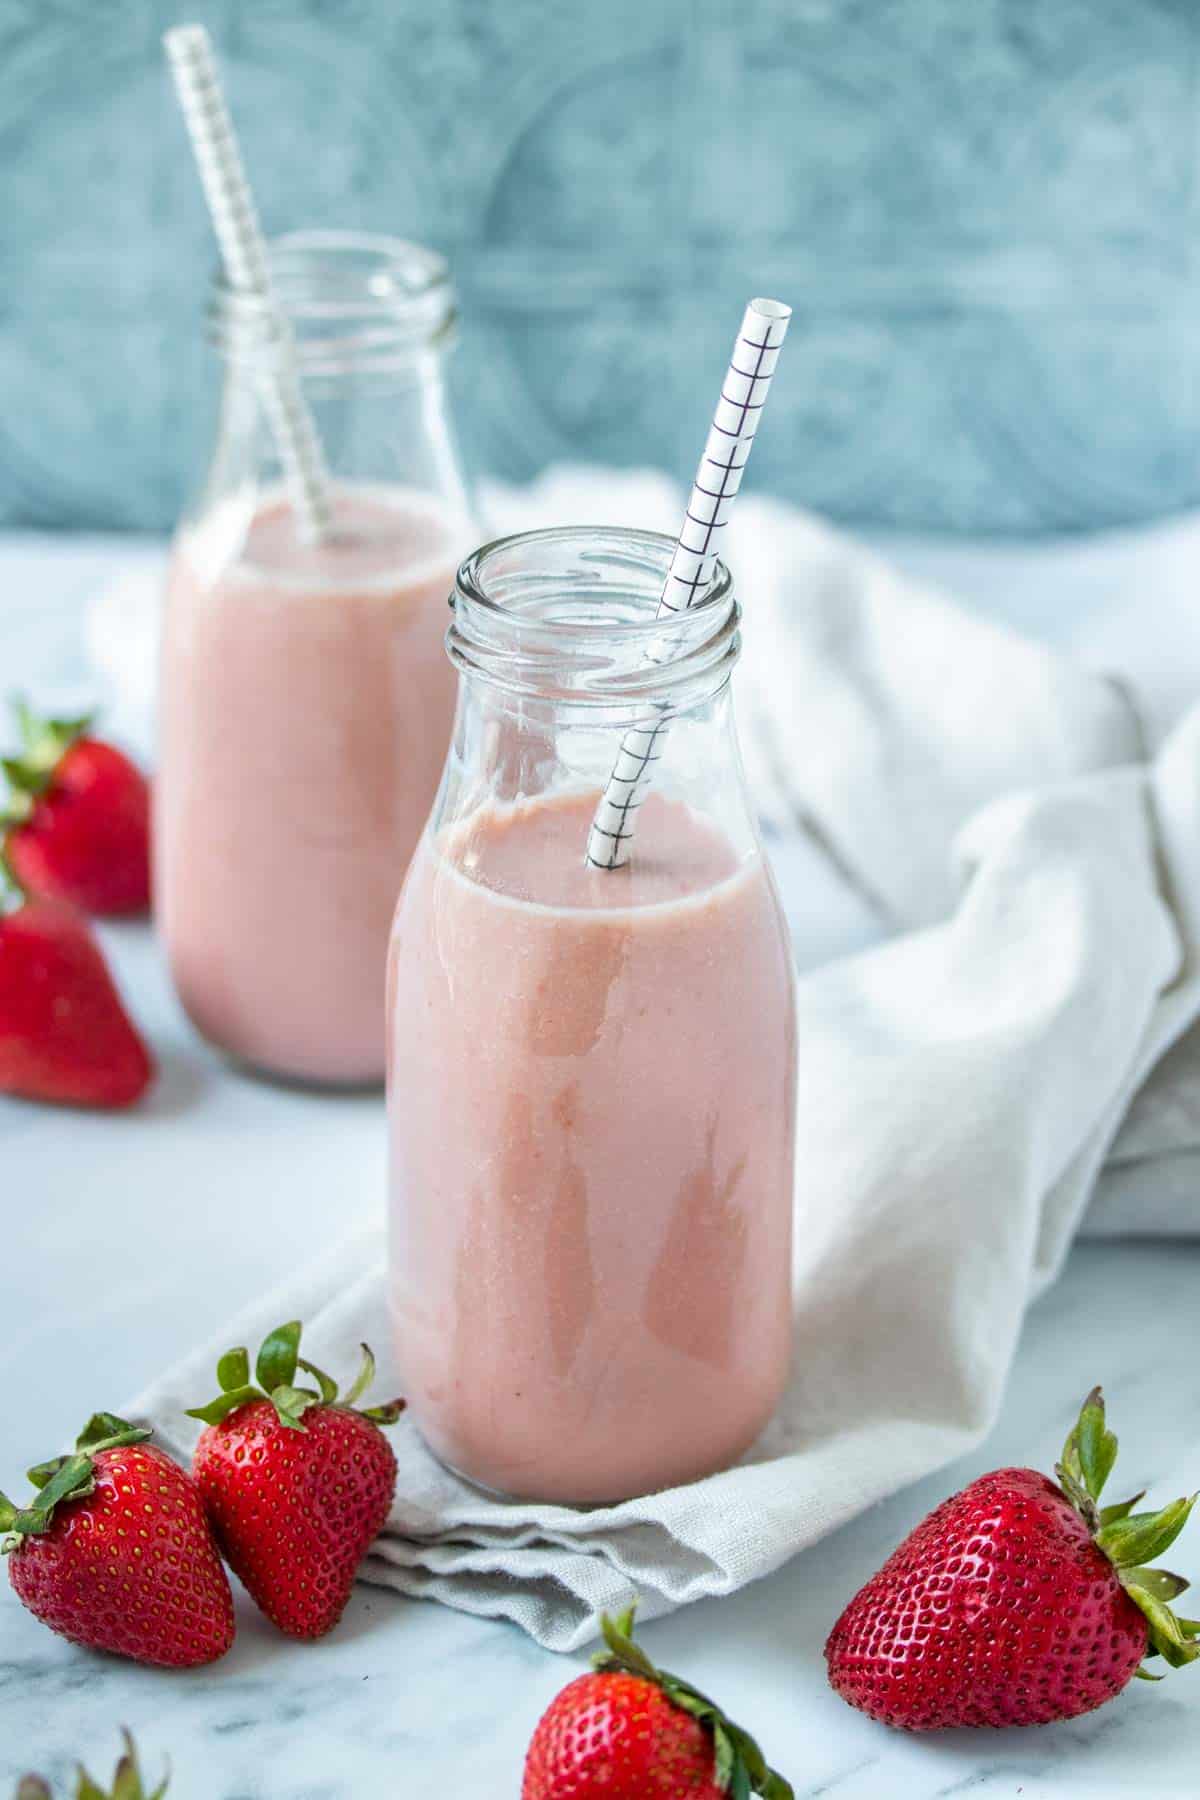 An angled top view of two glass jars with a pink milk in them on a light towel surrounded by strawberries